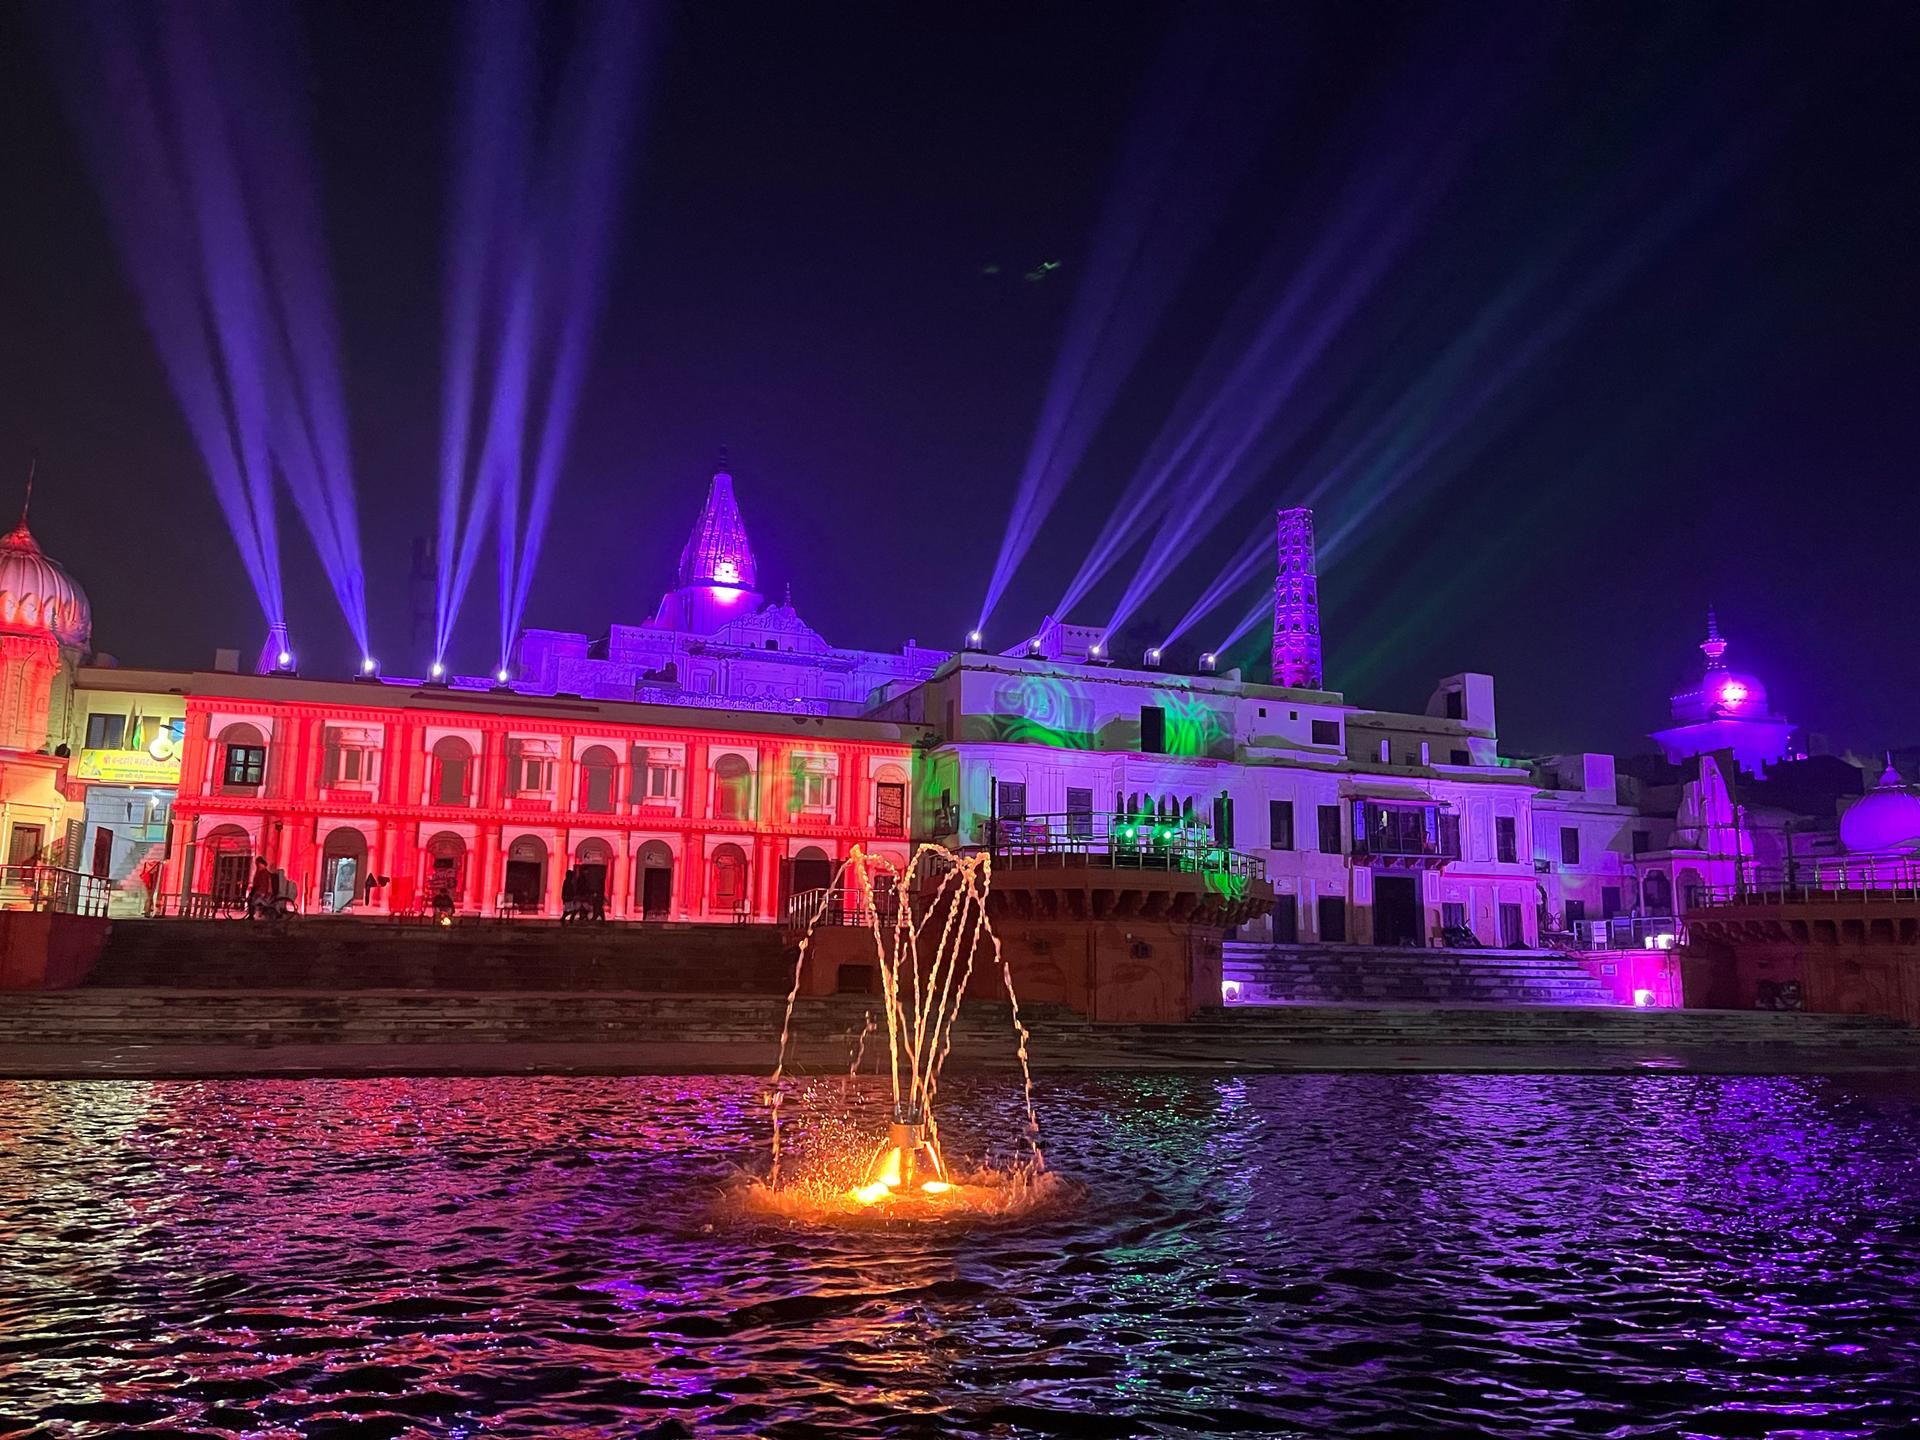 Multicolor laser beams light up the night sky on the banks of the Saryu river in Ayodhya. The town is gearing up to welcome huge crowds of pilgrims seeking blessings at its newest Hindu temple.